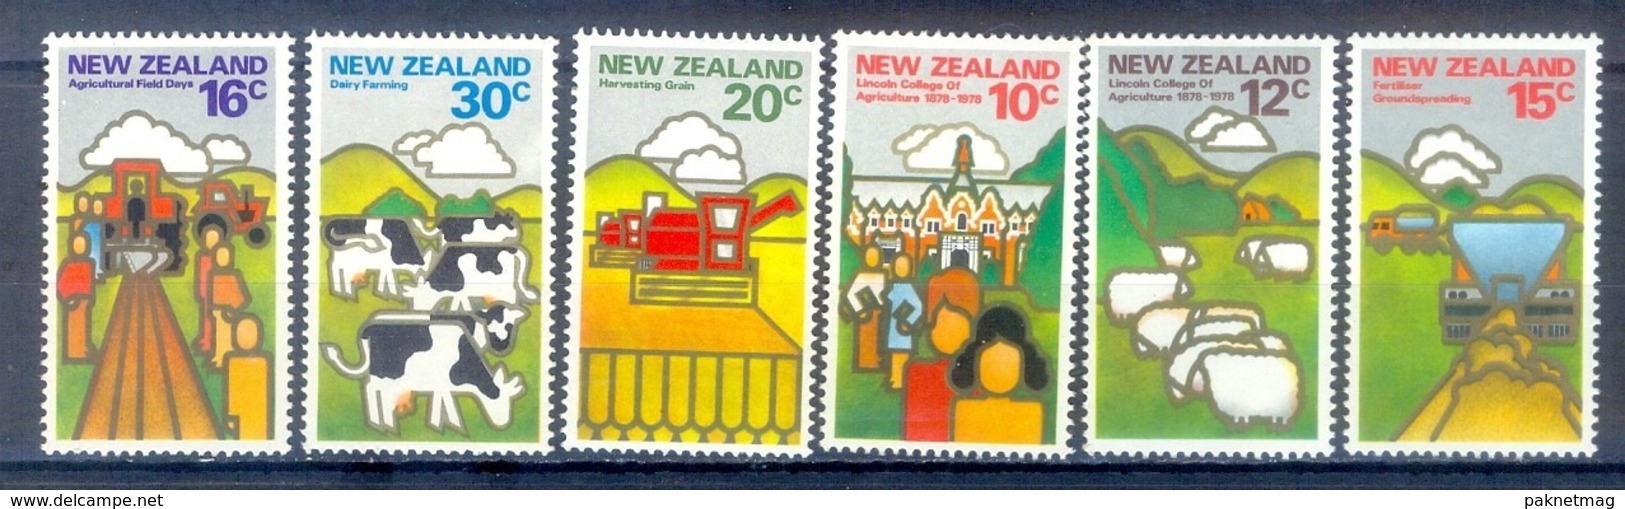 J174- New Zealand 1978 Land Resources Industries Agriculture. - Unused Stamps